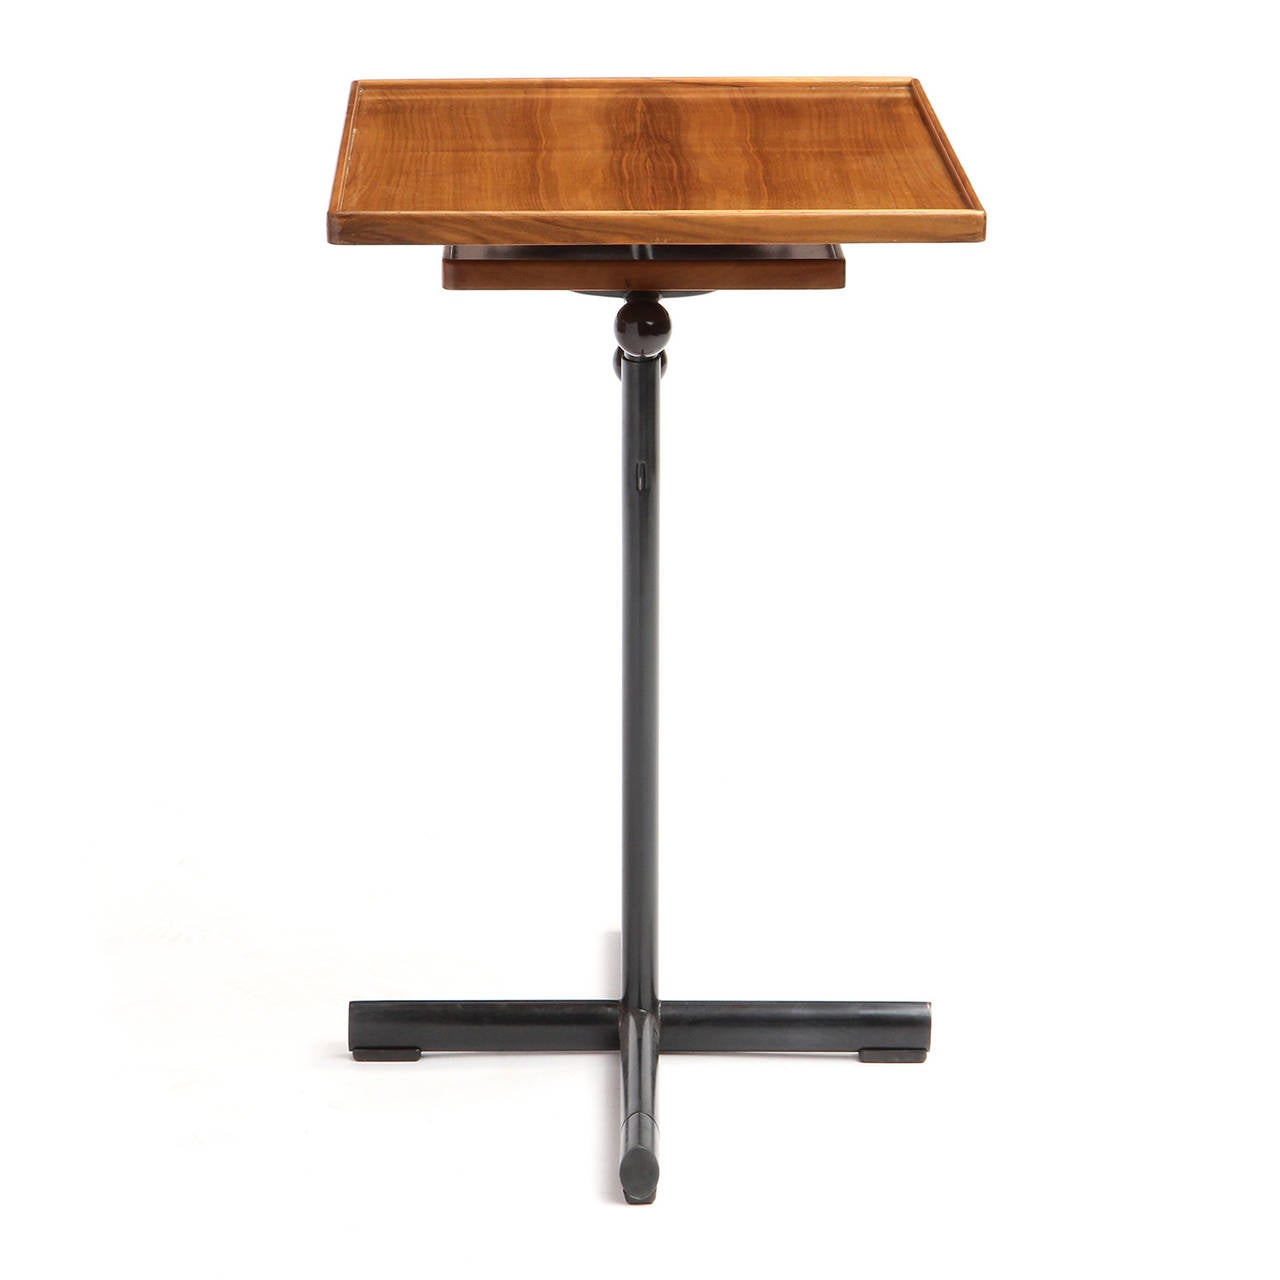 Mid-20th Century Adjustable Utility Table by Embru